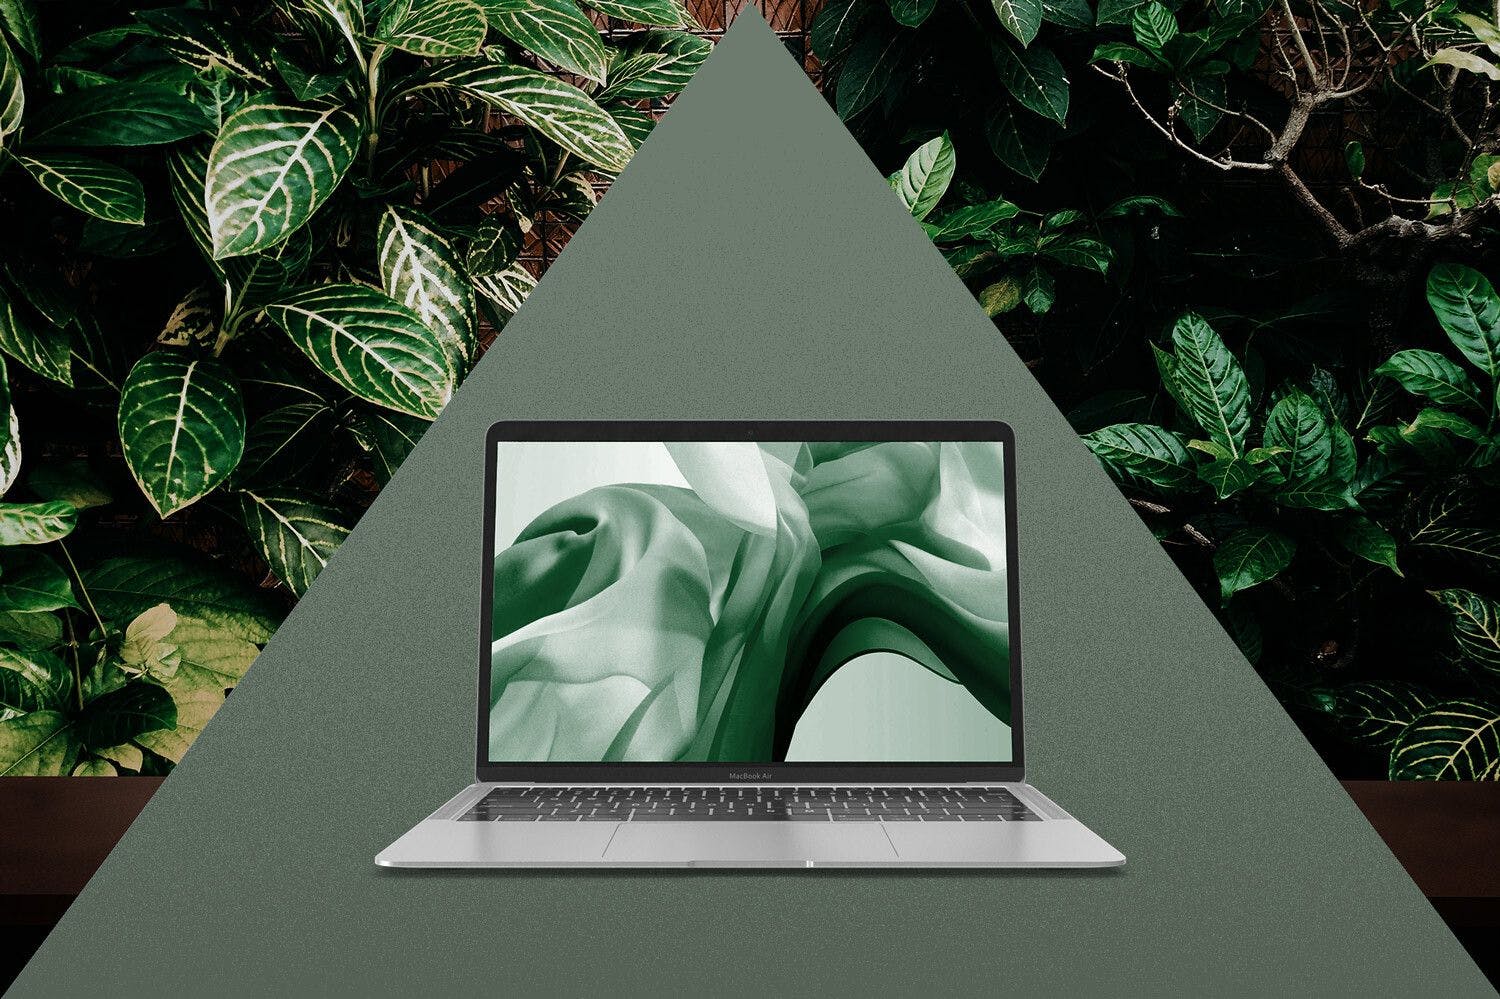 image of a laptop in a green triangle and surrounded by various leaves